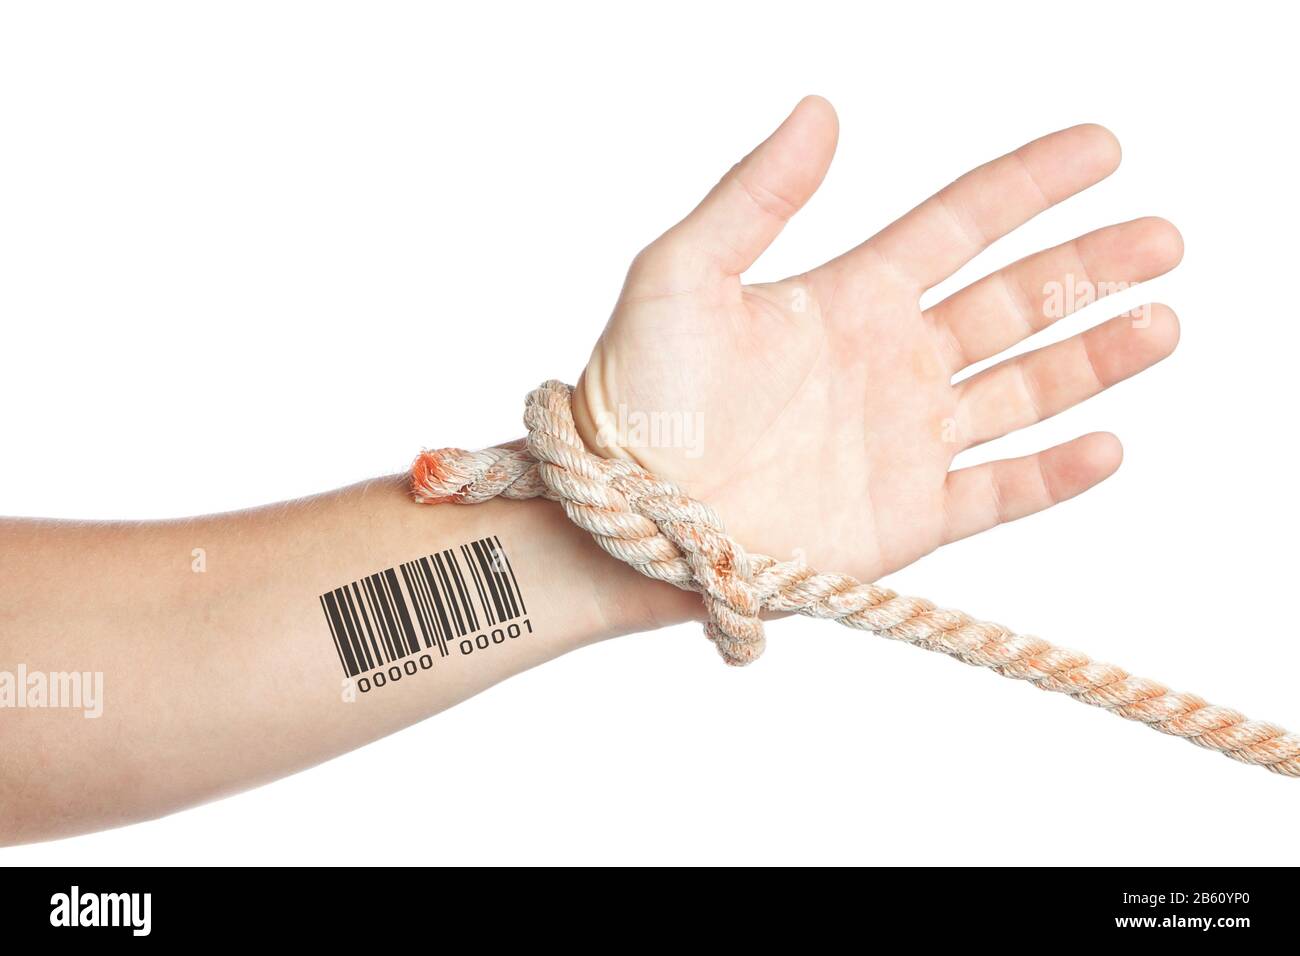 Limitation of personal privacy. Hand with barcode tied with a rope Stock  Photo - Alamy